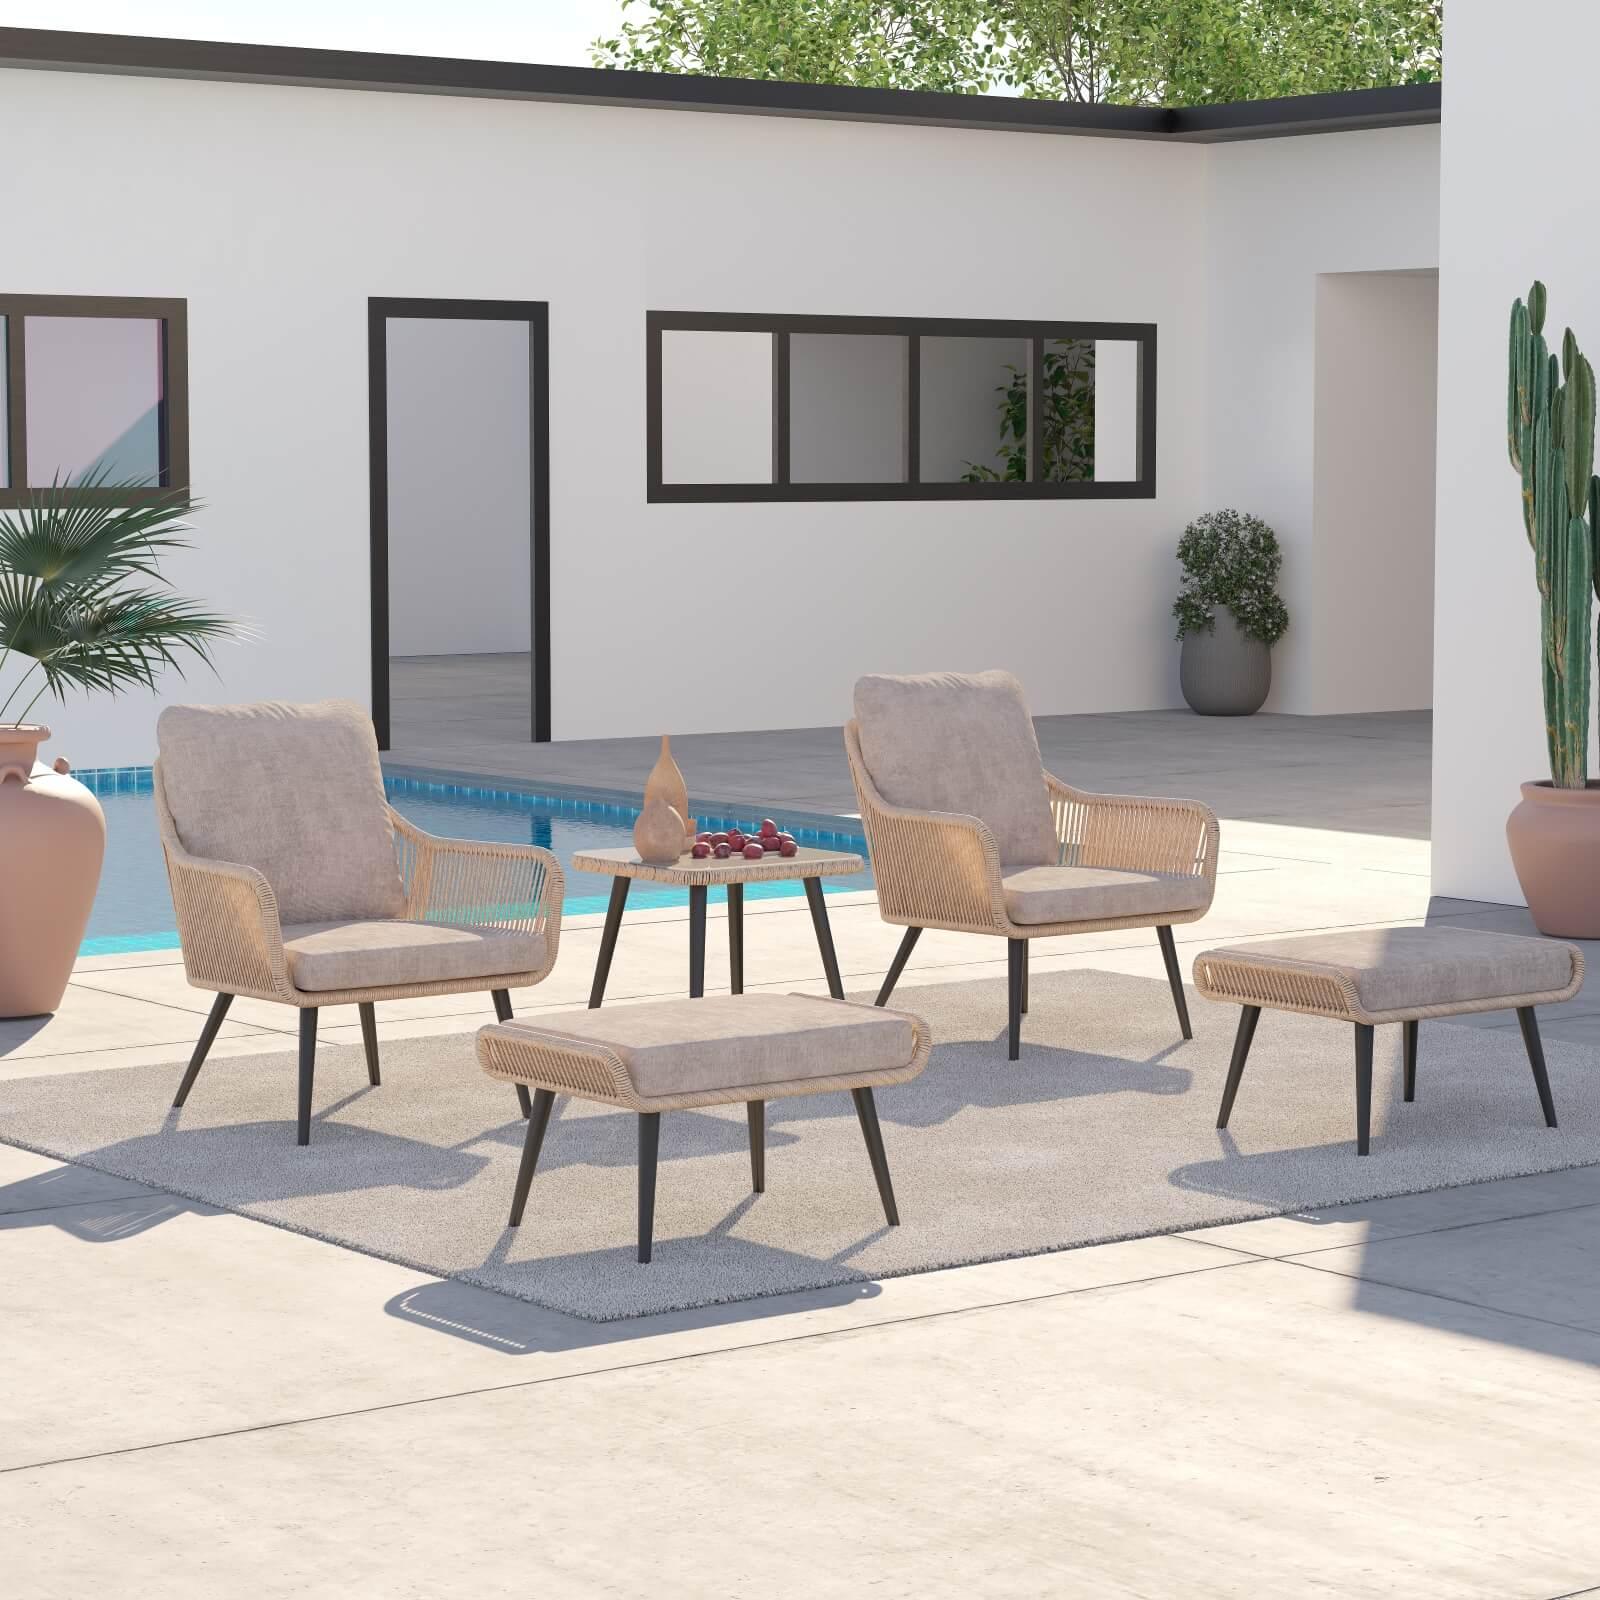 Hallerbos Modern Wicker Outdoor Furniture, 5-piece outdoor bistro set with ottomans, steel frame and natural twisted rattan design, beige cushion, 1 square coffee table, 2 armchairs, 2 ottomans, background view - Jardina Furniture#Color_Natural